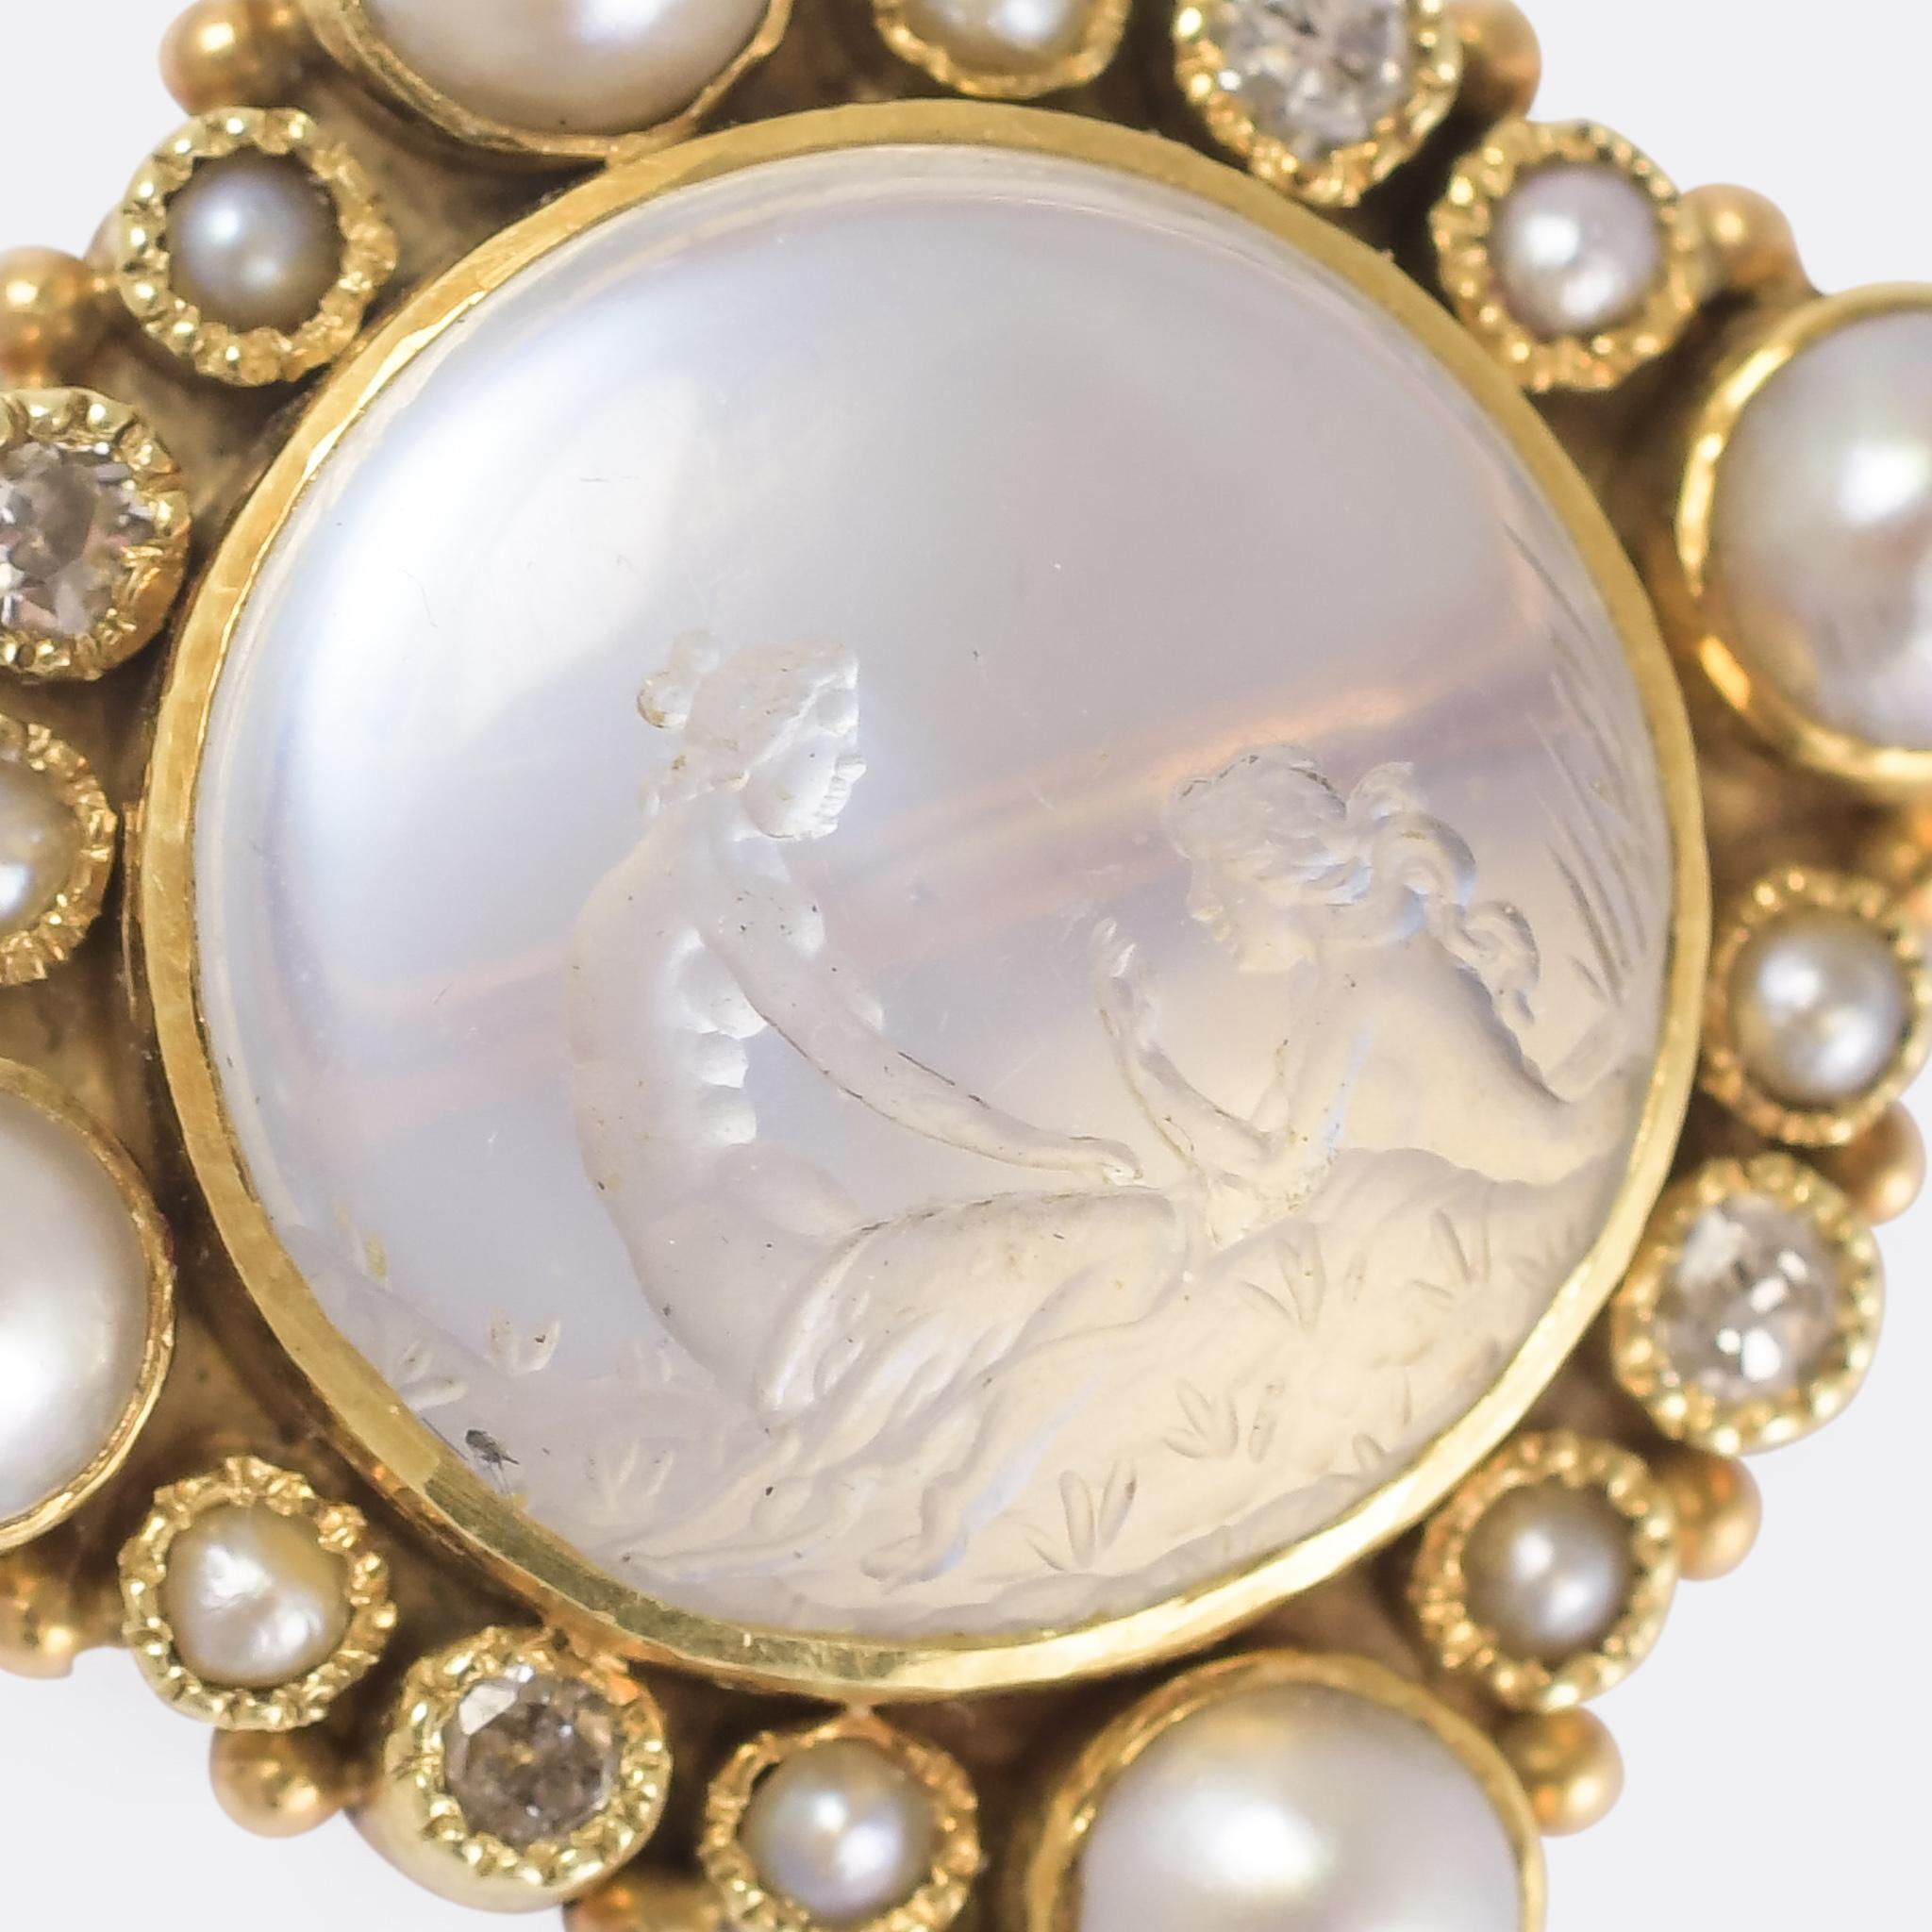 A beautiful Victorian brooch set with an intaglio carved moonstone centrepiece within a diamond and pearl set border. The scene depicted is of two classical women at a river bank, one bathing in the water, the other kneeling on the bank. The